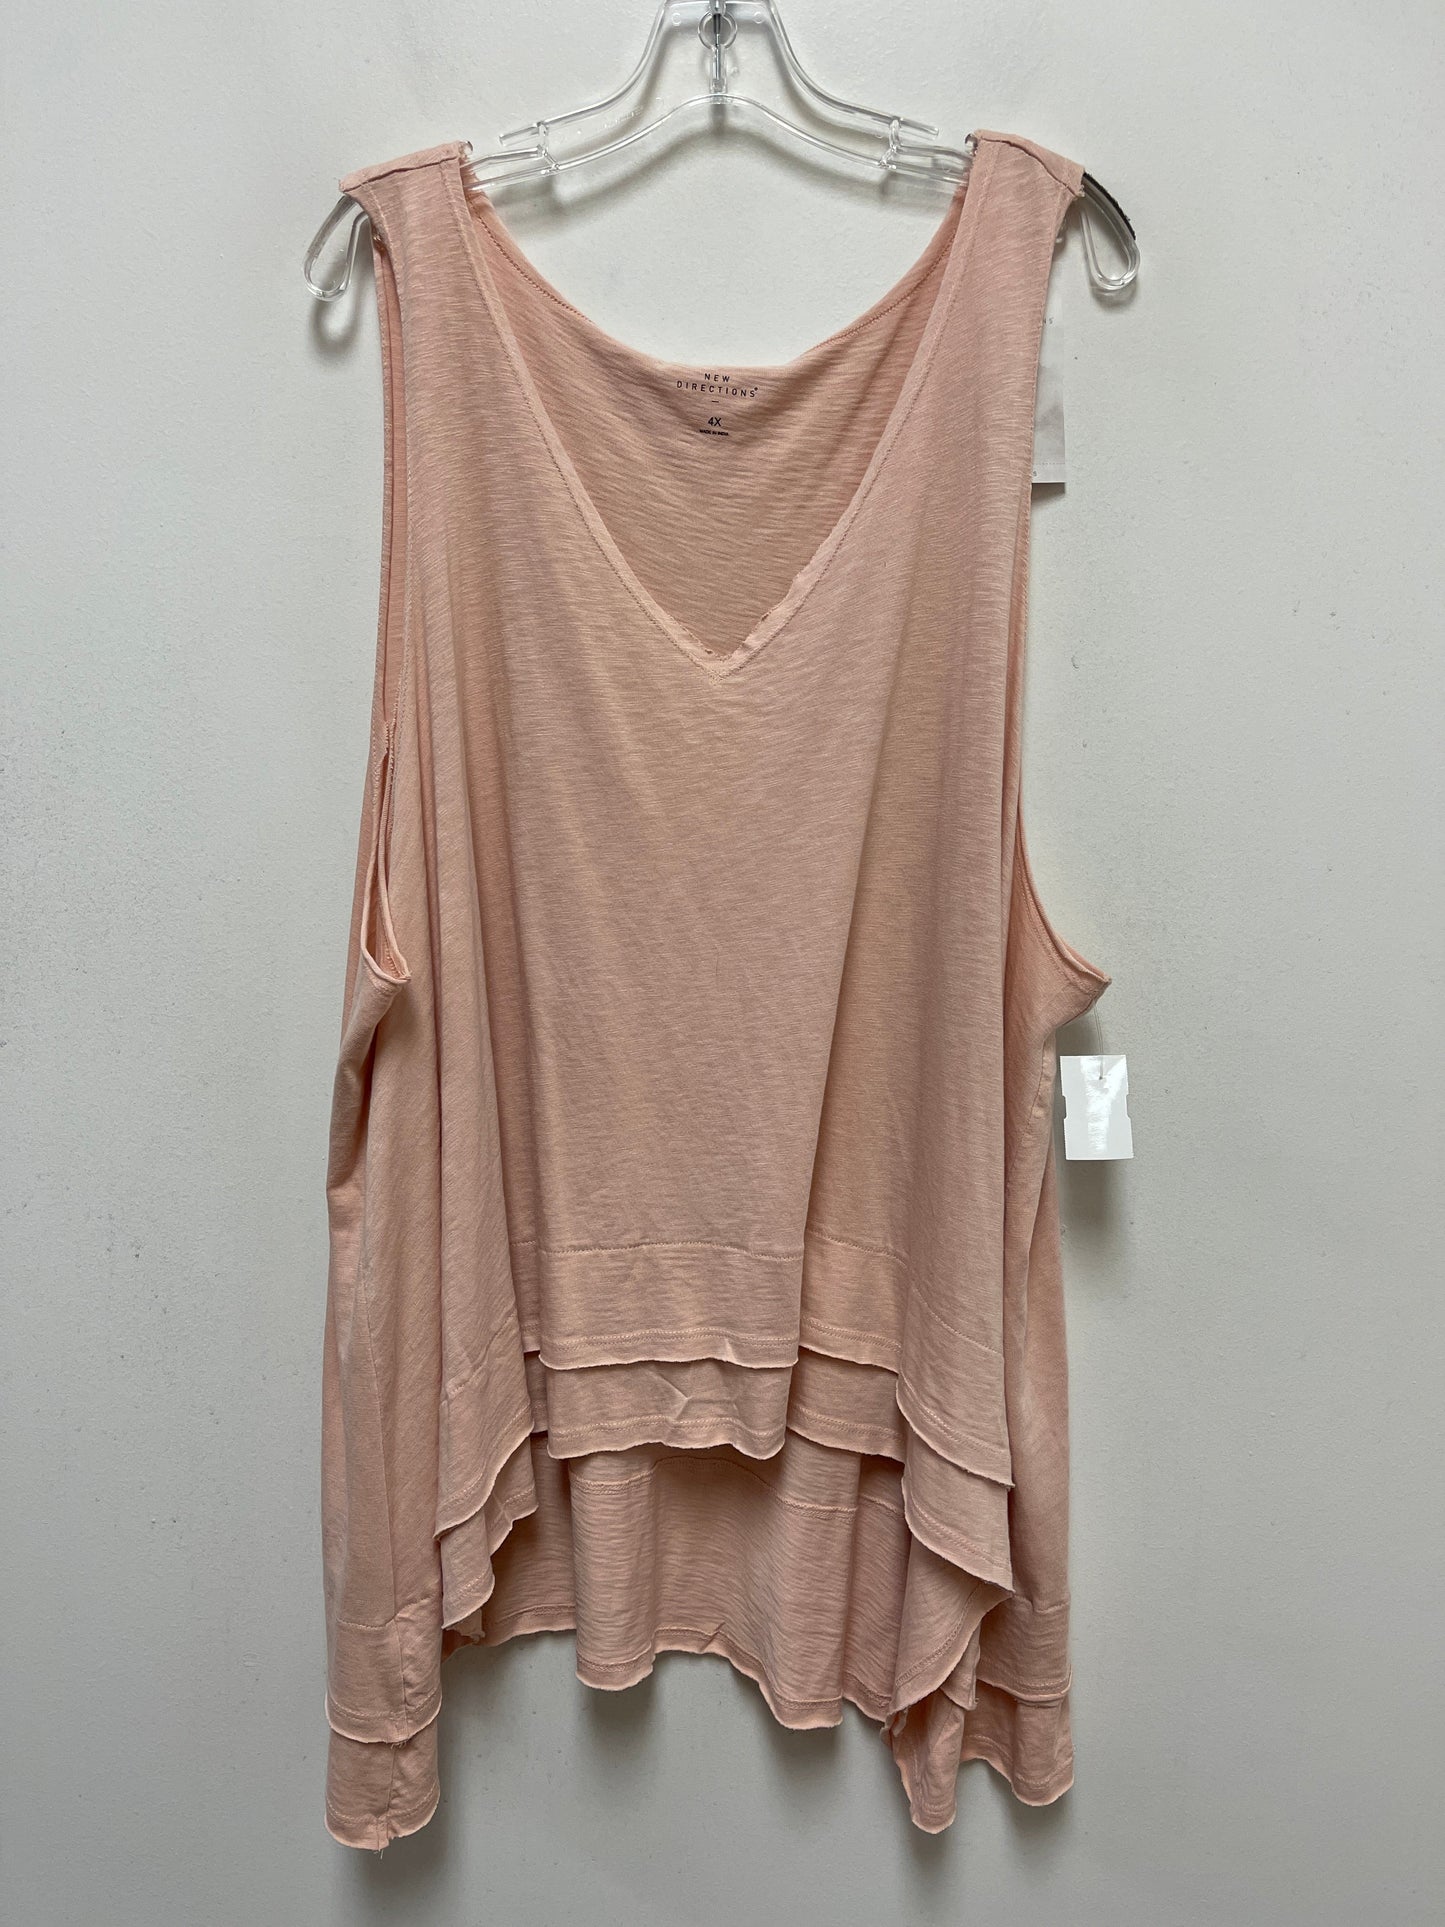 Pink Top Sleeveless New Directions, Size 4x